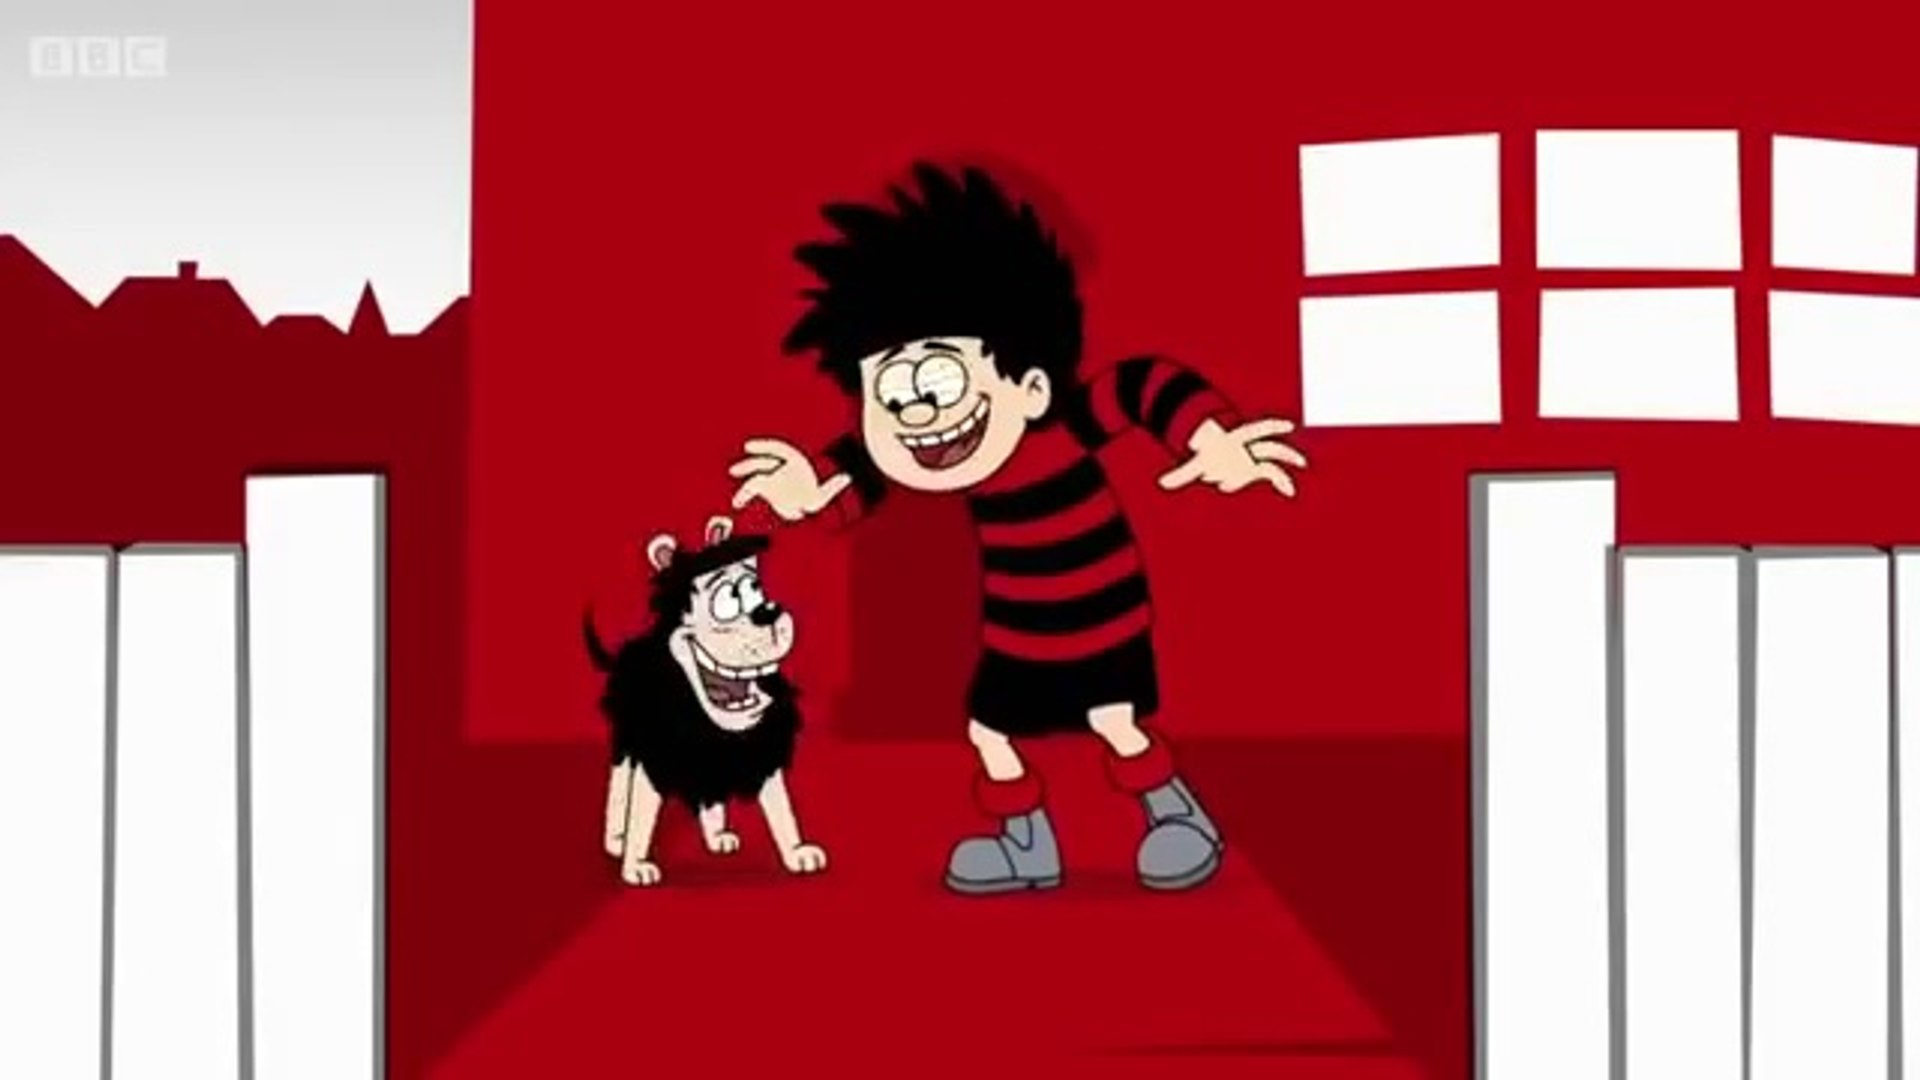 Dennis the Menace and Gnasher. Mike the Menace. Dennis the Menace movie. Dennis the Menace Macabre.